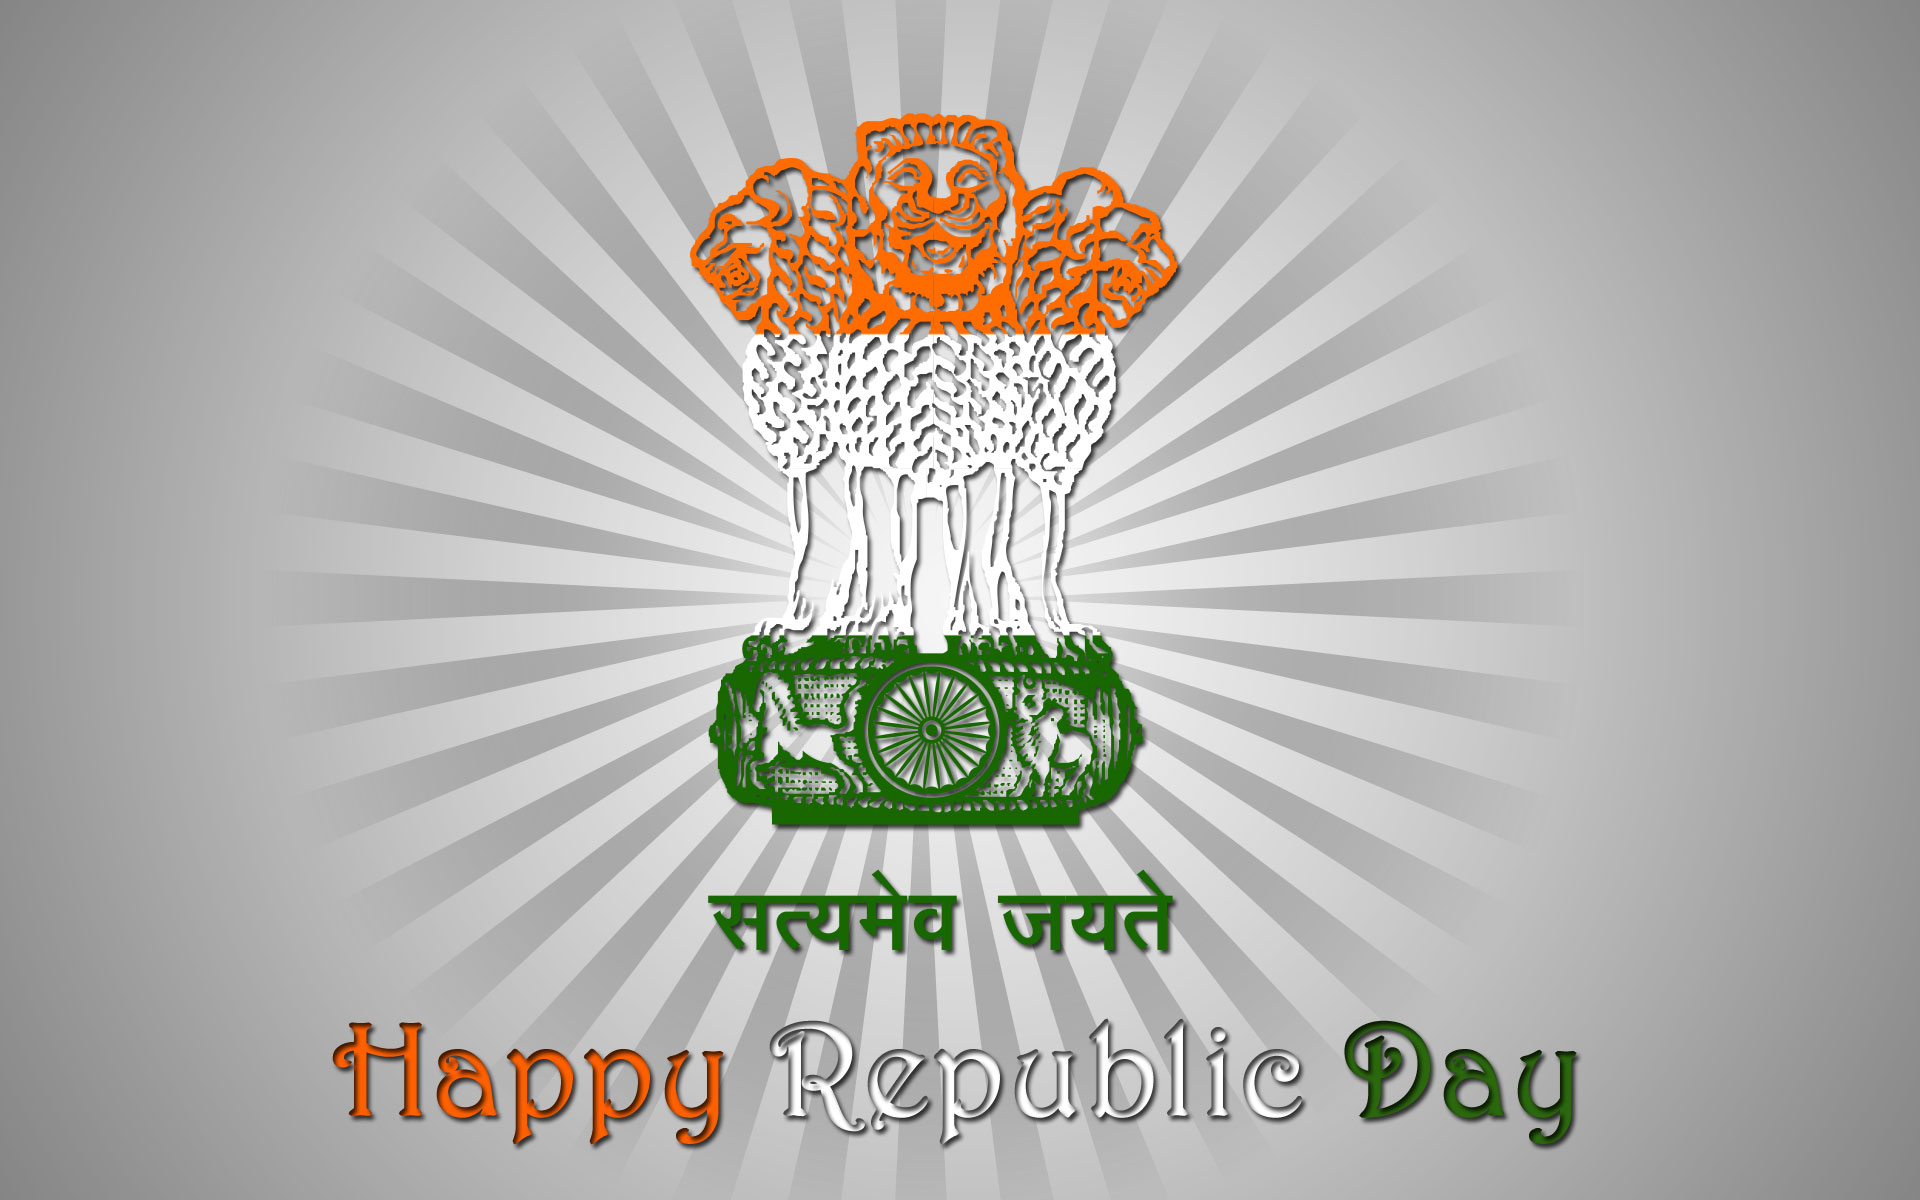 Happy Republic Day Images For Windows 8